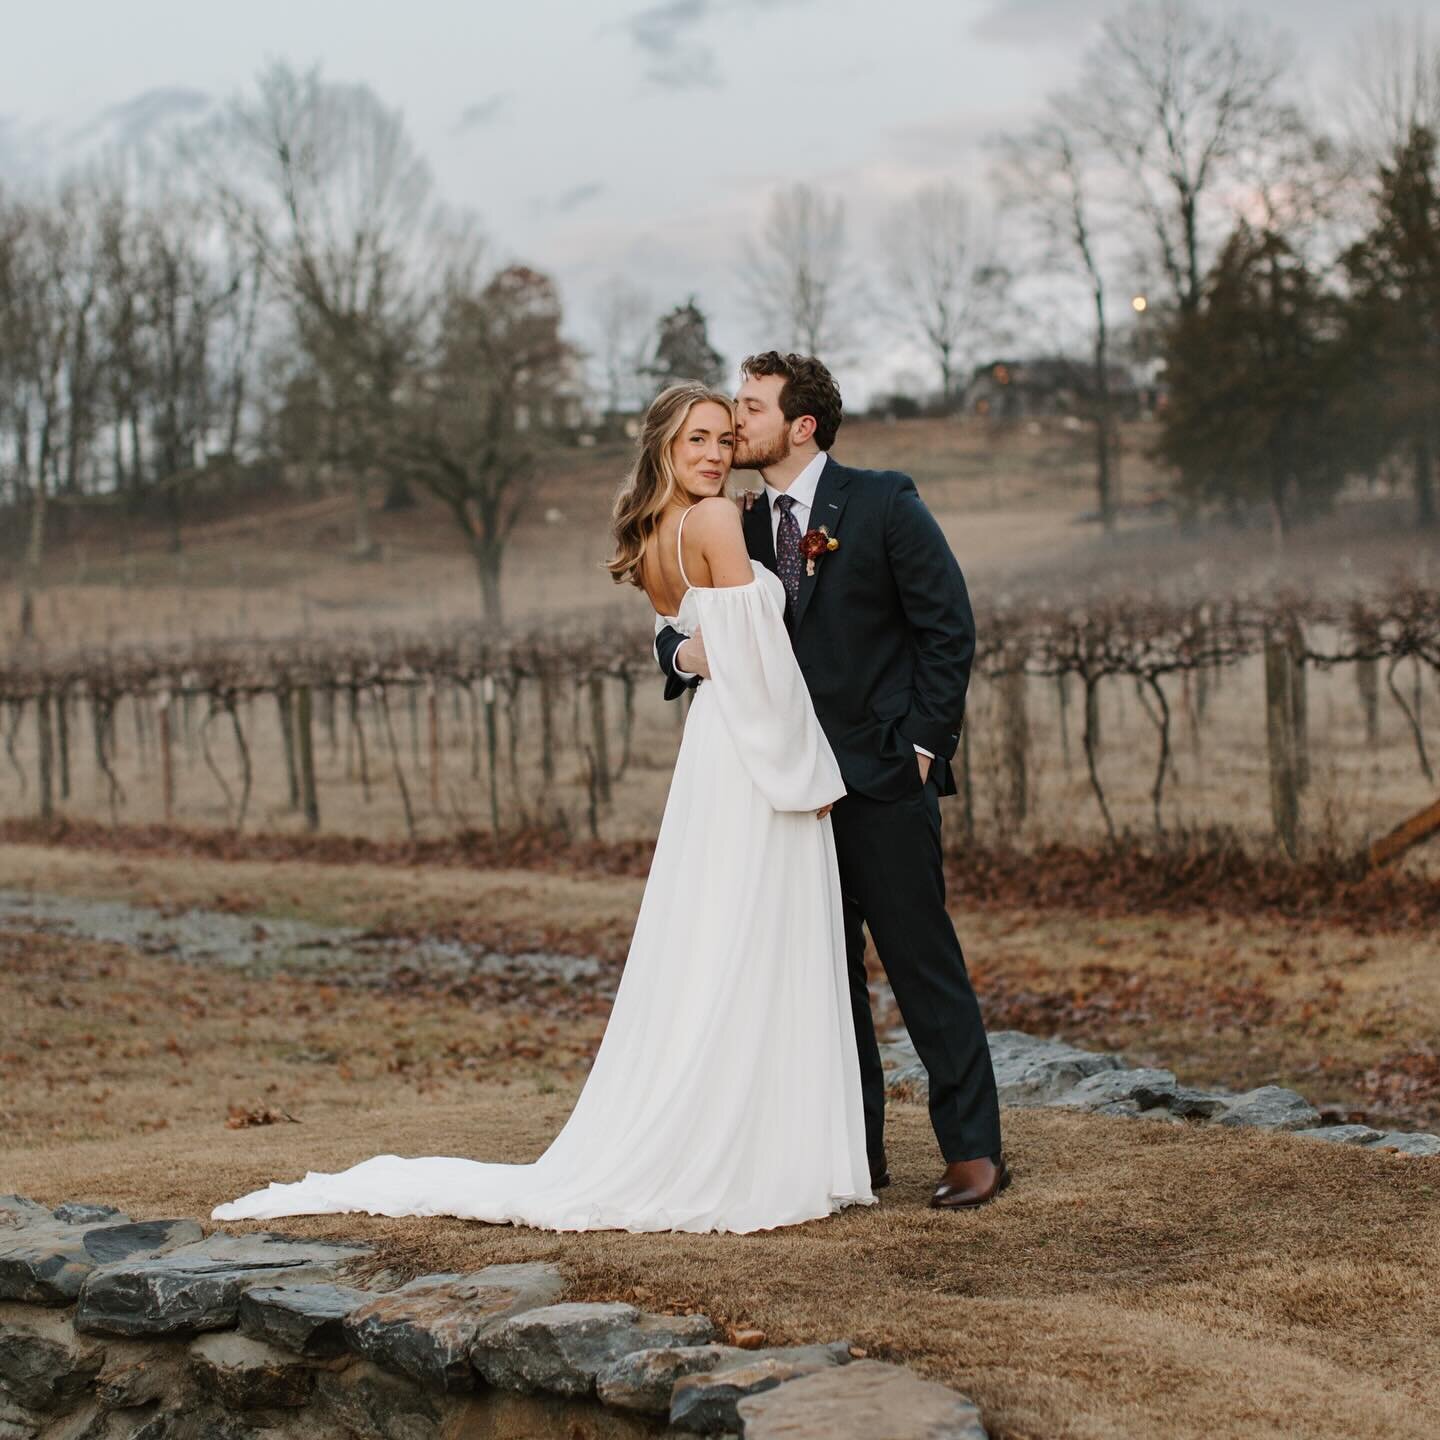 Meg + Tucker // no rainy skies could dampen the sheer joy and beauty of these two souls becoming one yesterday. To say it was a sweet day is a wild understatement. 

The Team&mdash; 
Venue: @longhollowgardens 
Florals: @echoesofedenflorals
DJ: @enter